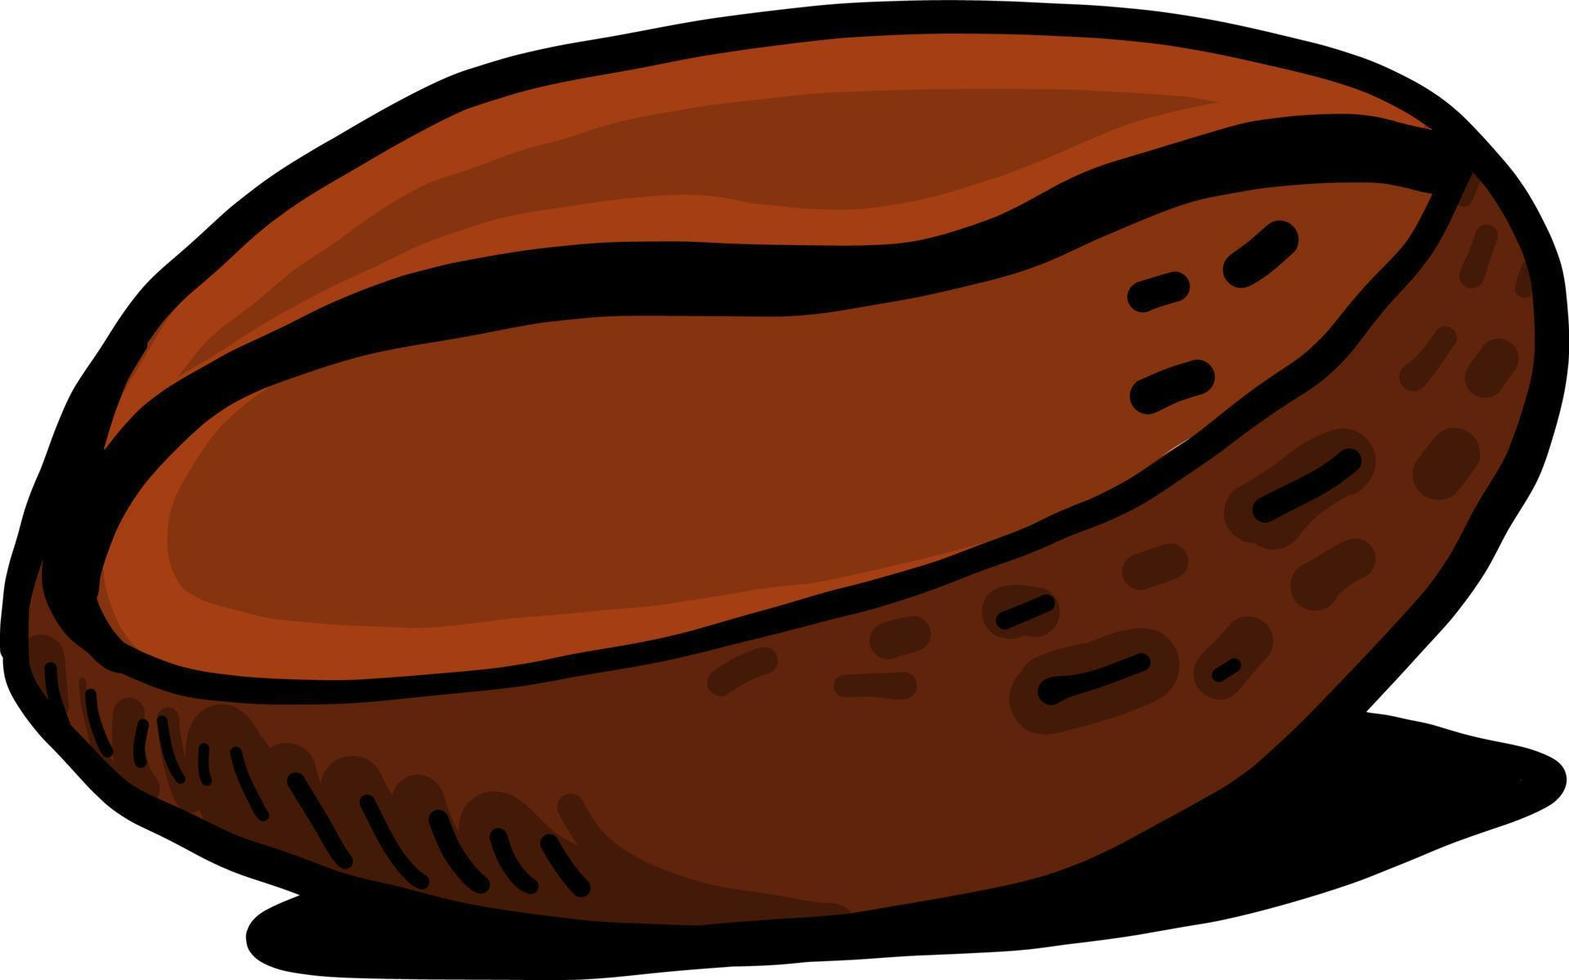 Coffee bean, illustration, vector on white background